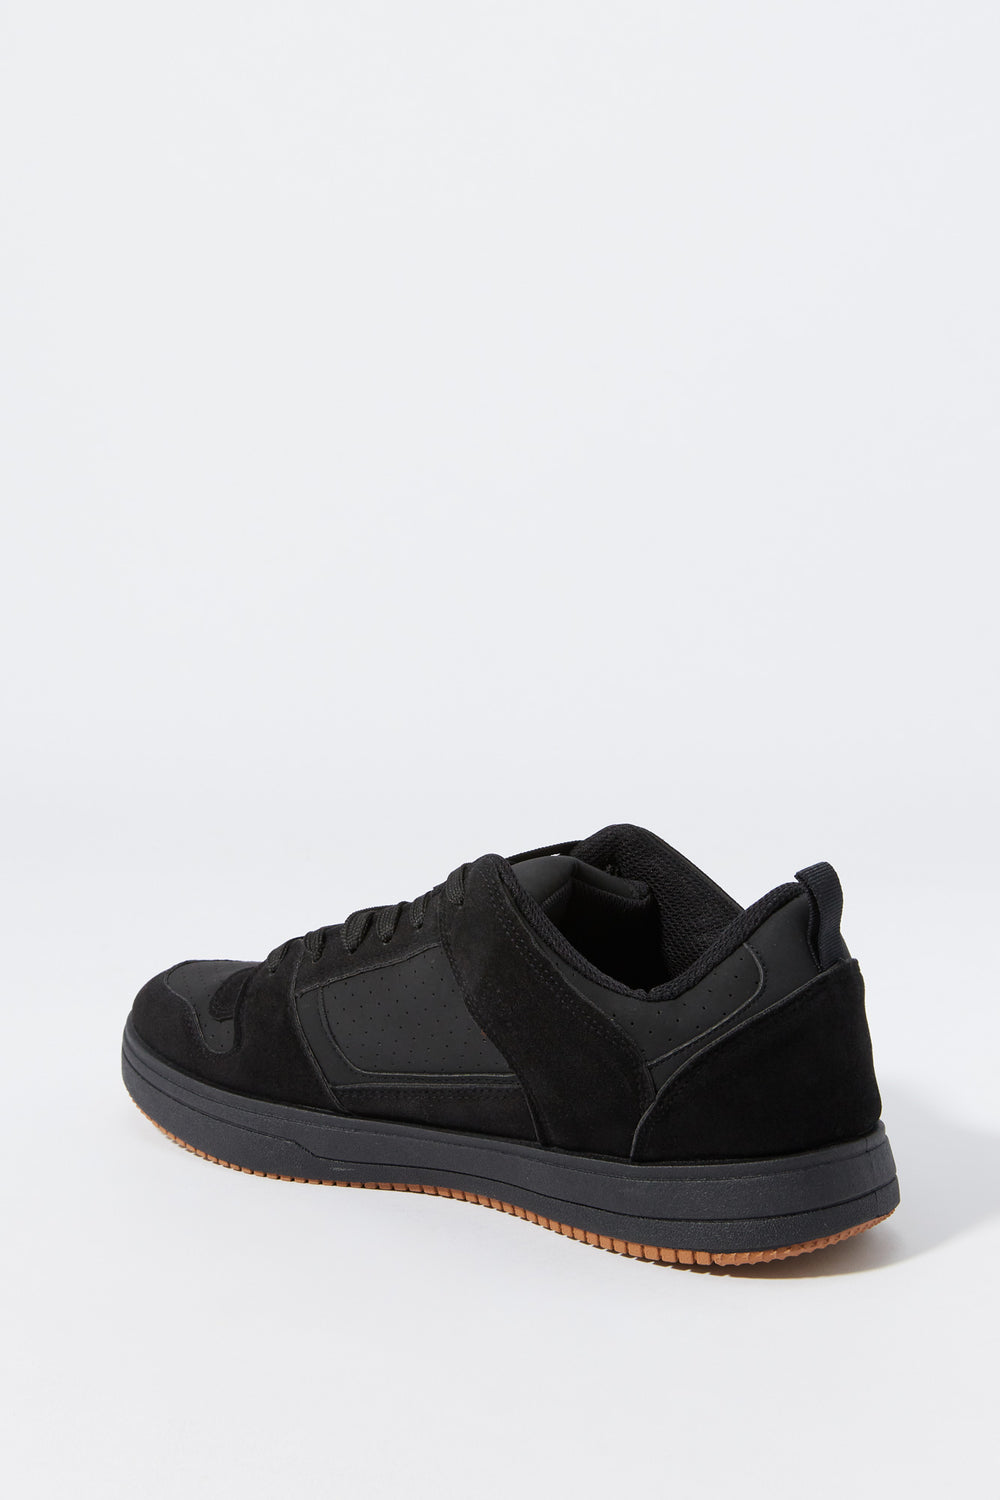 Low Top Casual Chunky Sneaker Low Top Casual Chunky Sneaker 9